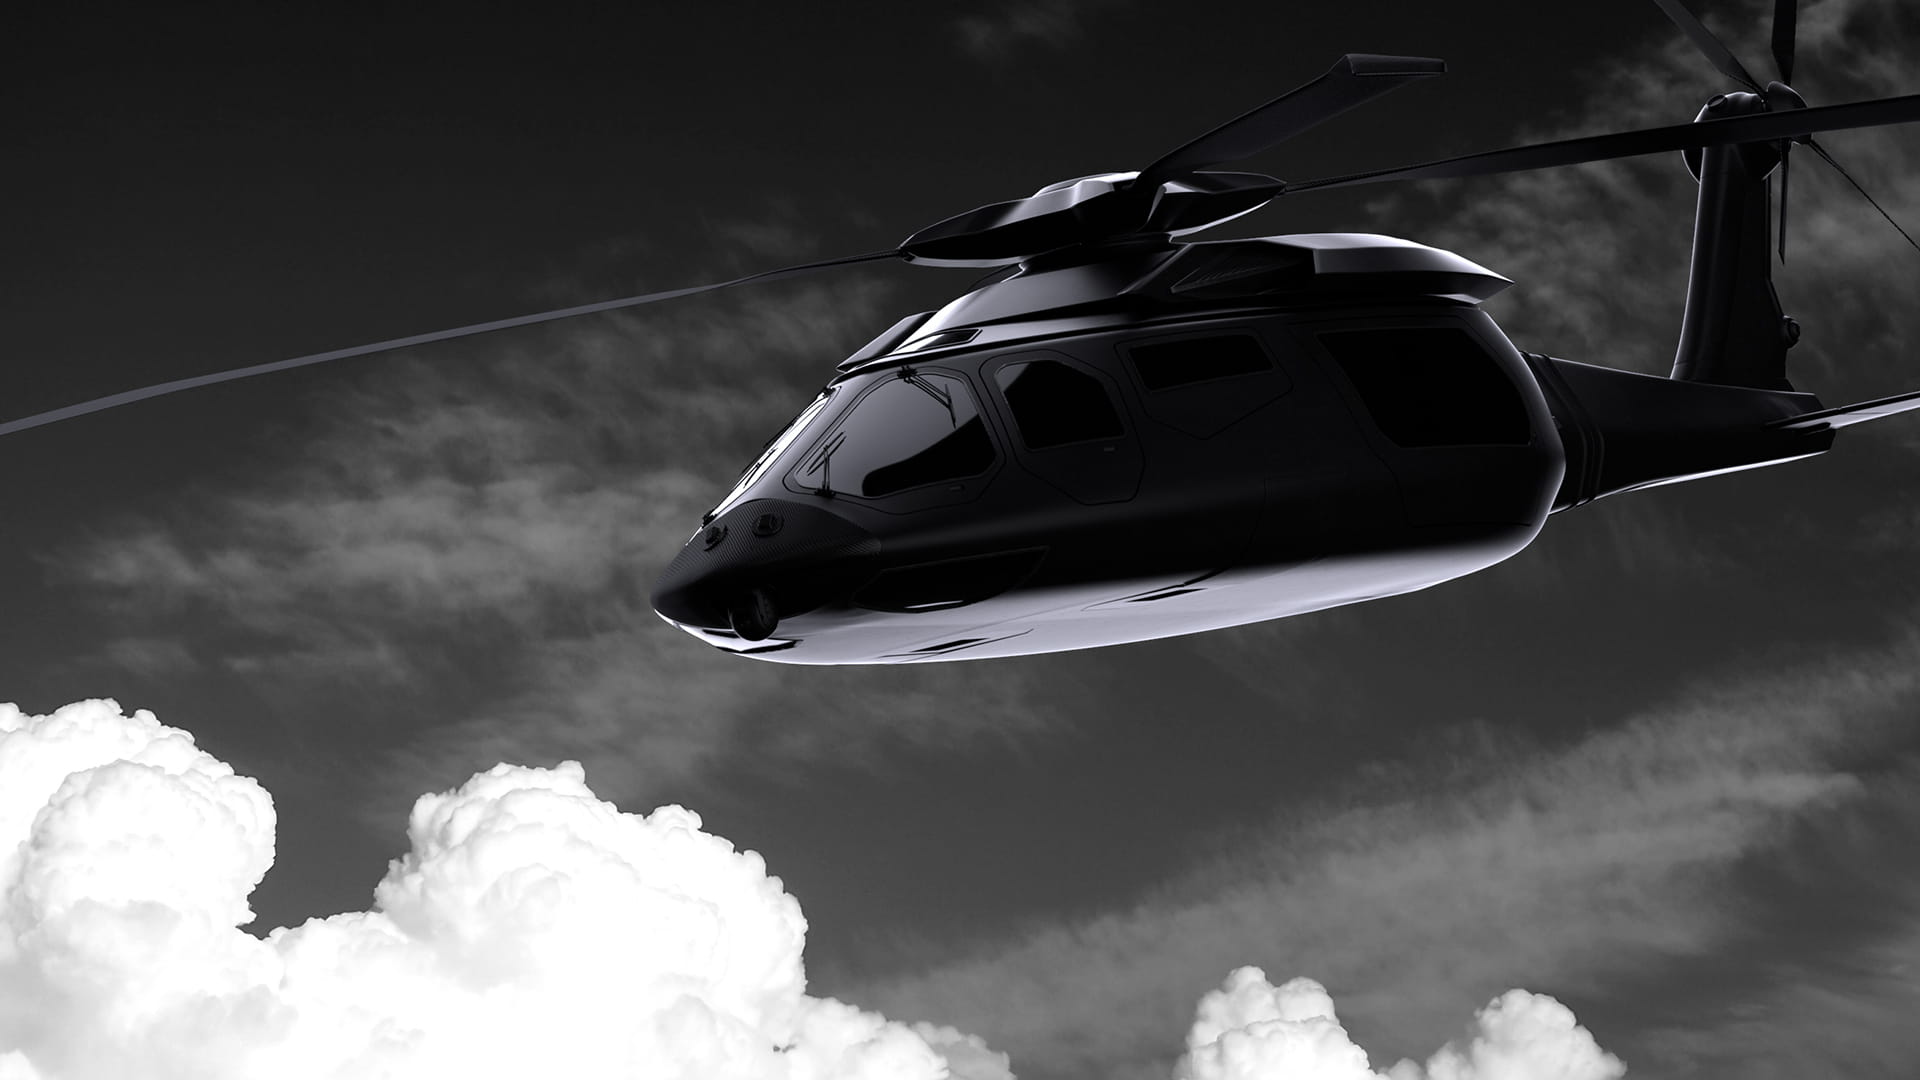 Future Vertical Lift helicopter with clouds